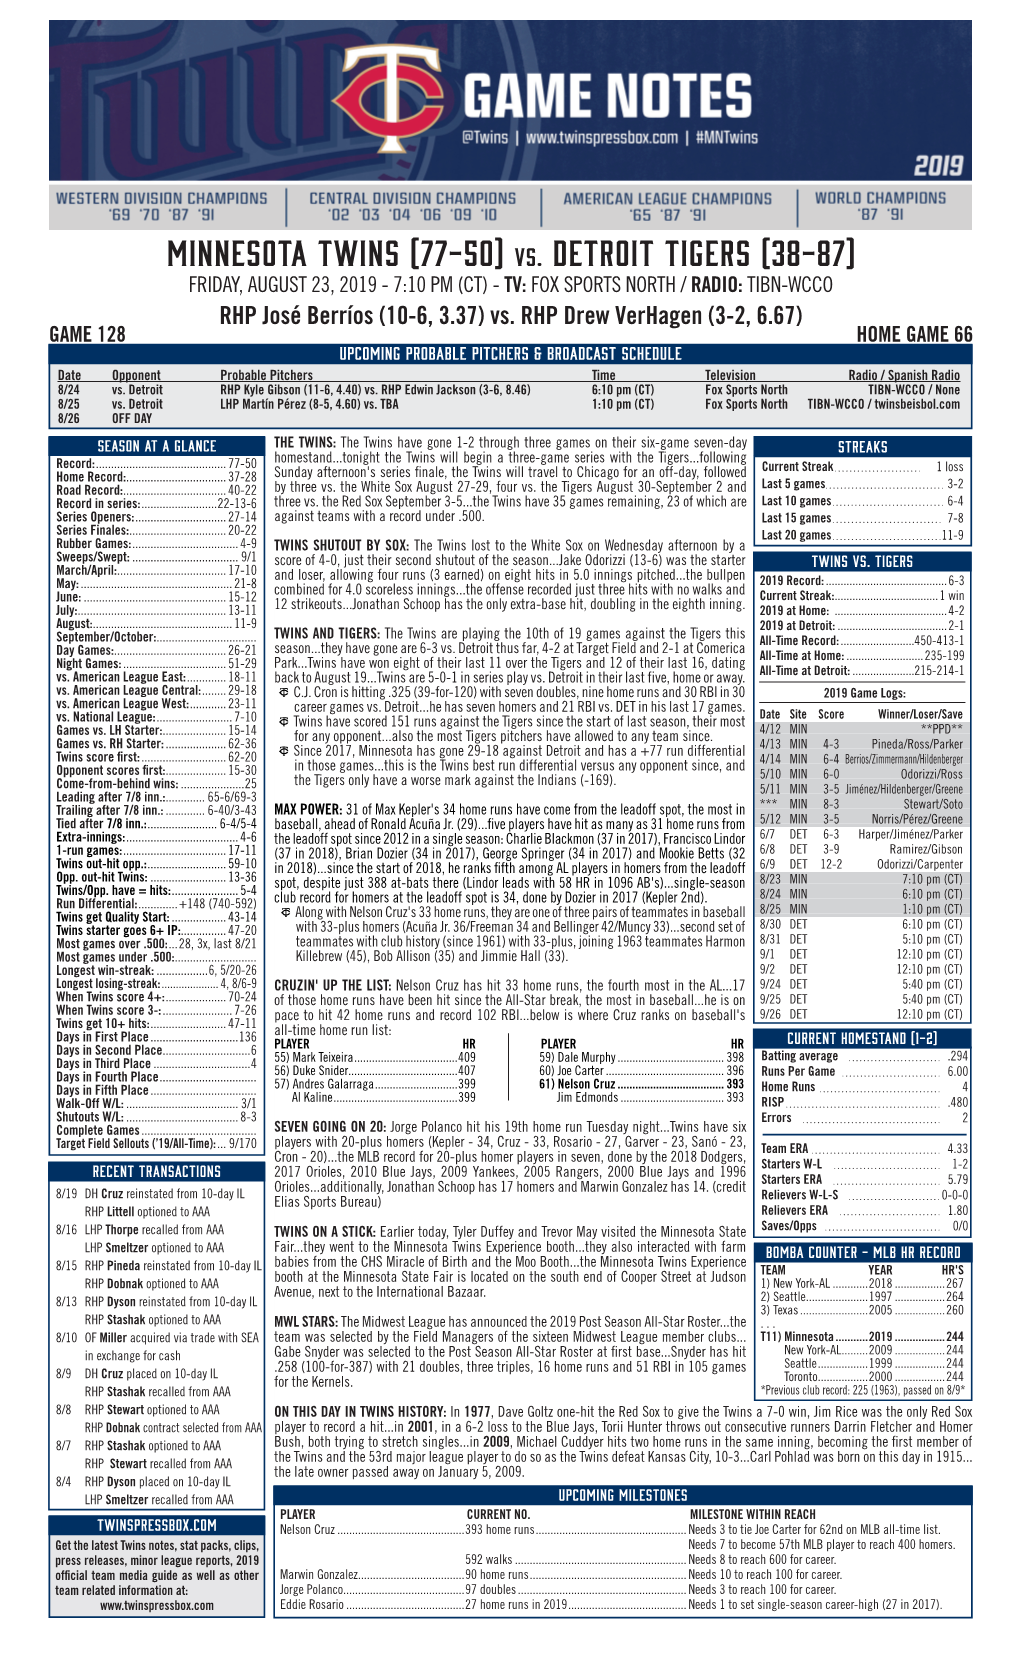 Twins Notes, 8-23 Vs